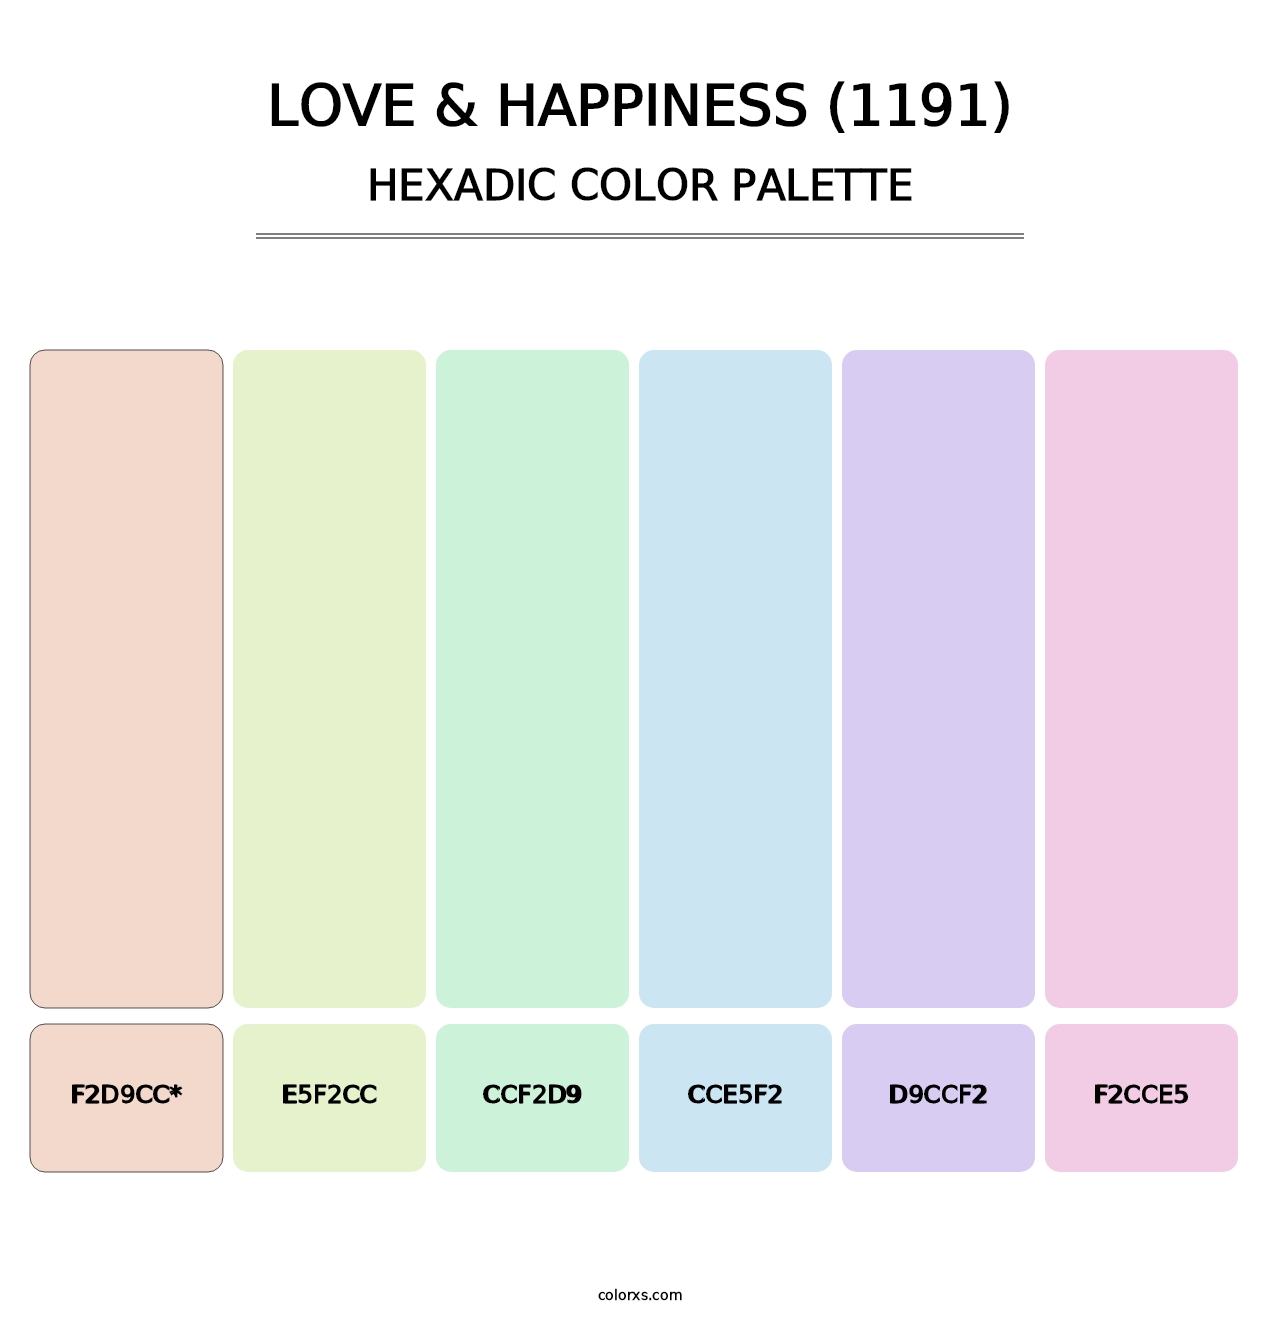 Love & Happiness (1191) - Hexadic Color Palette